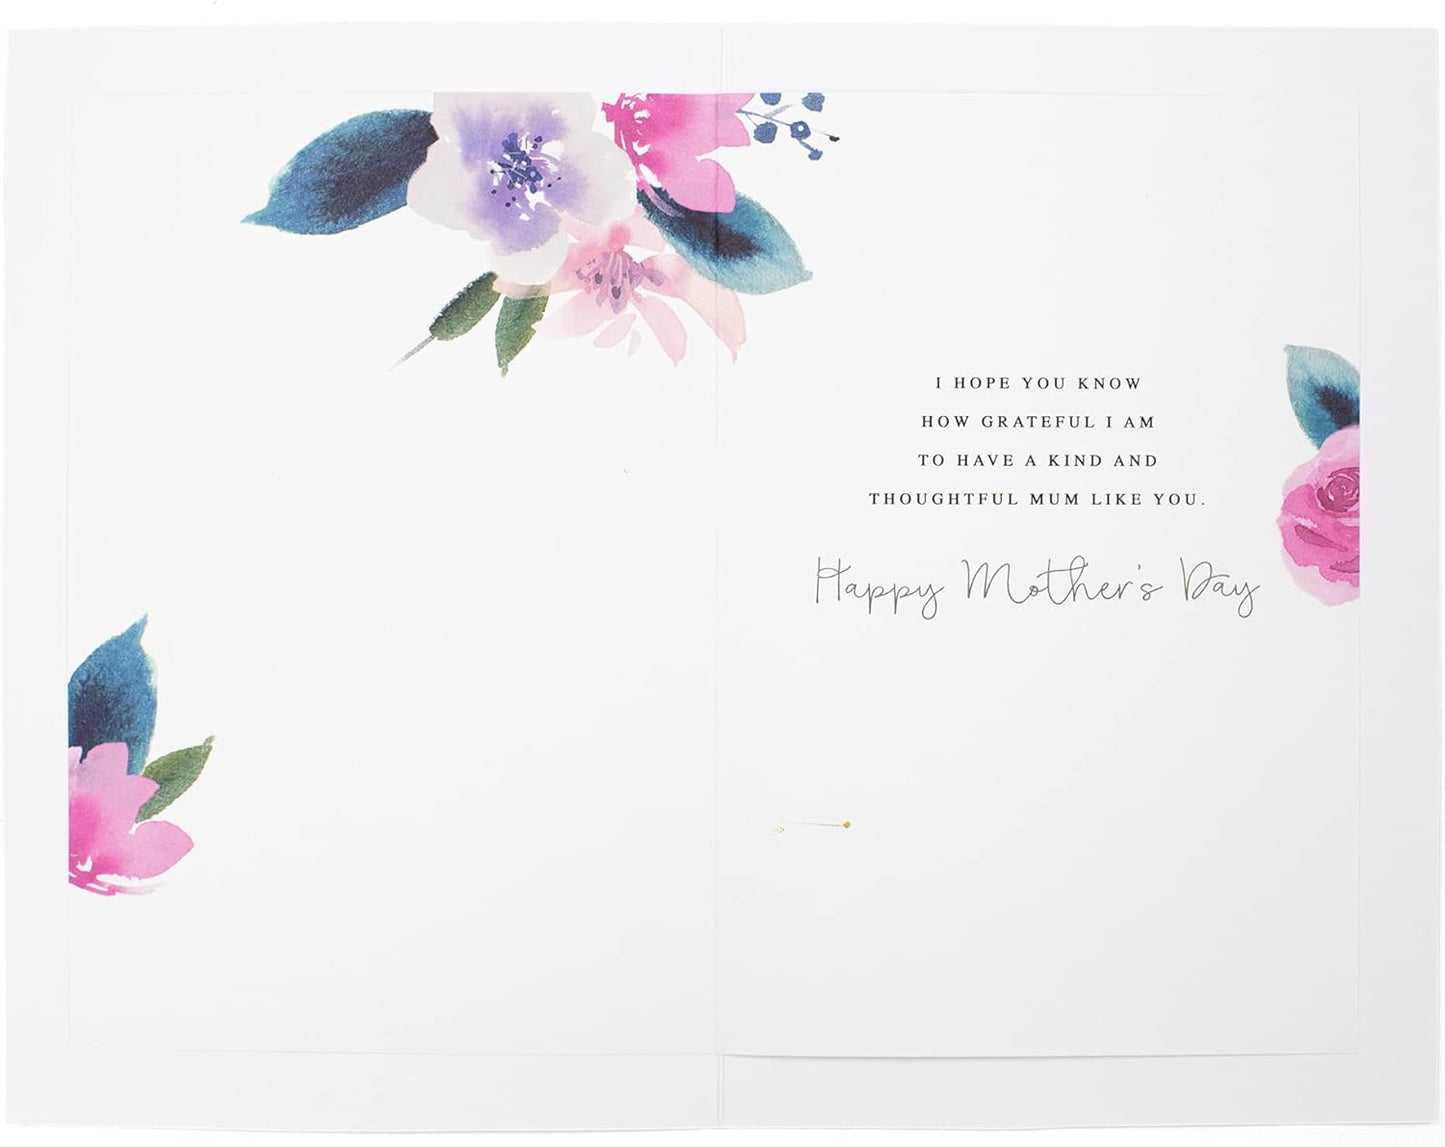 From Son Traditional Floral Design Mother's Day Card